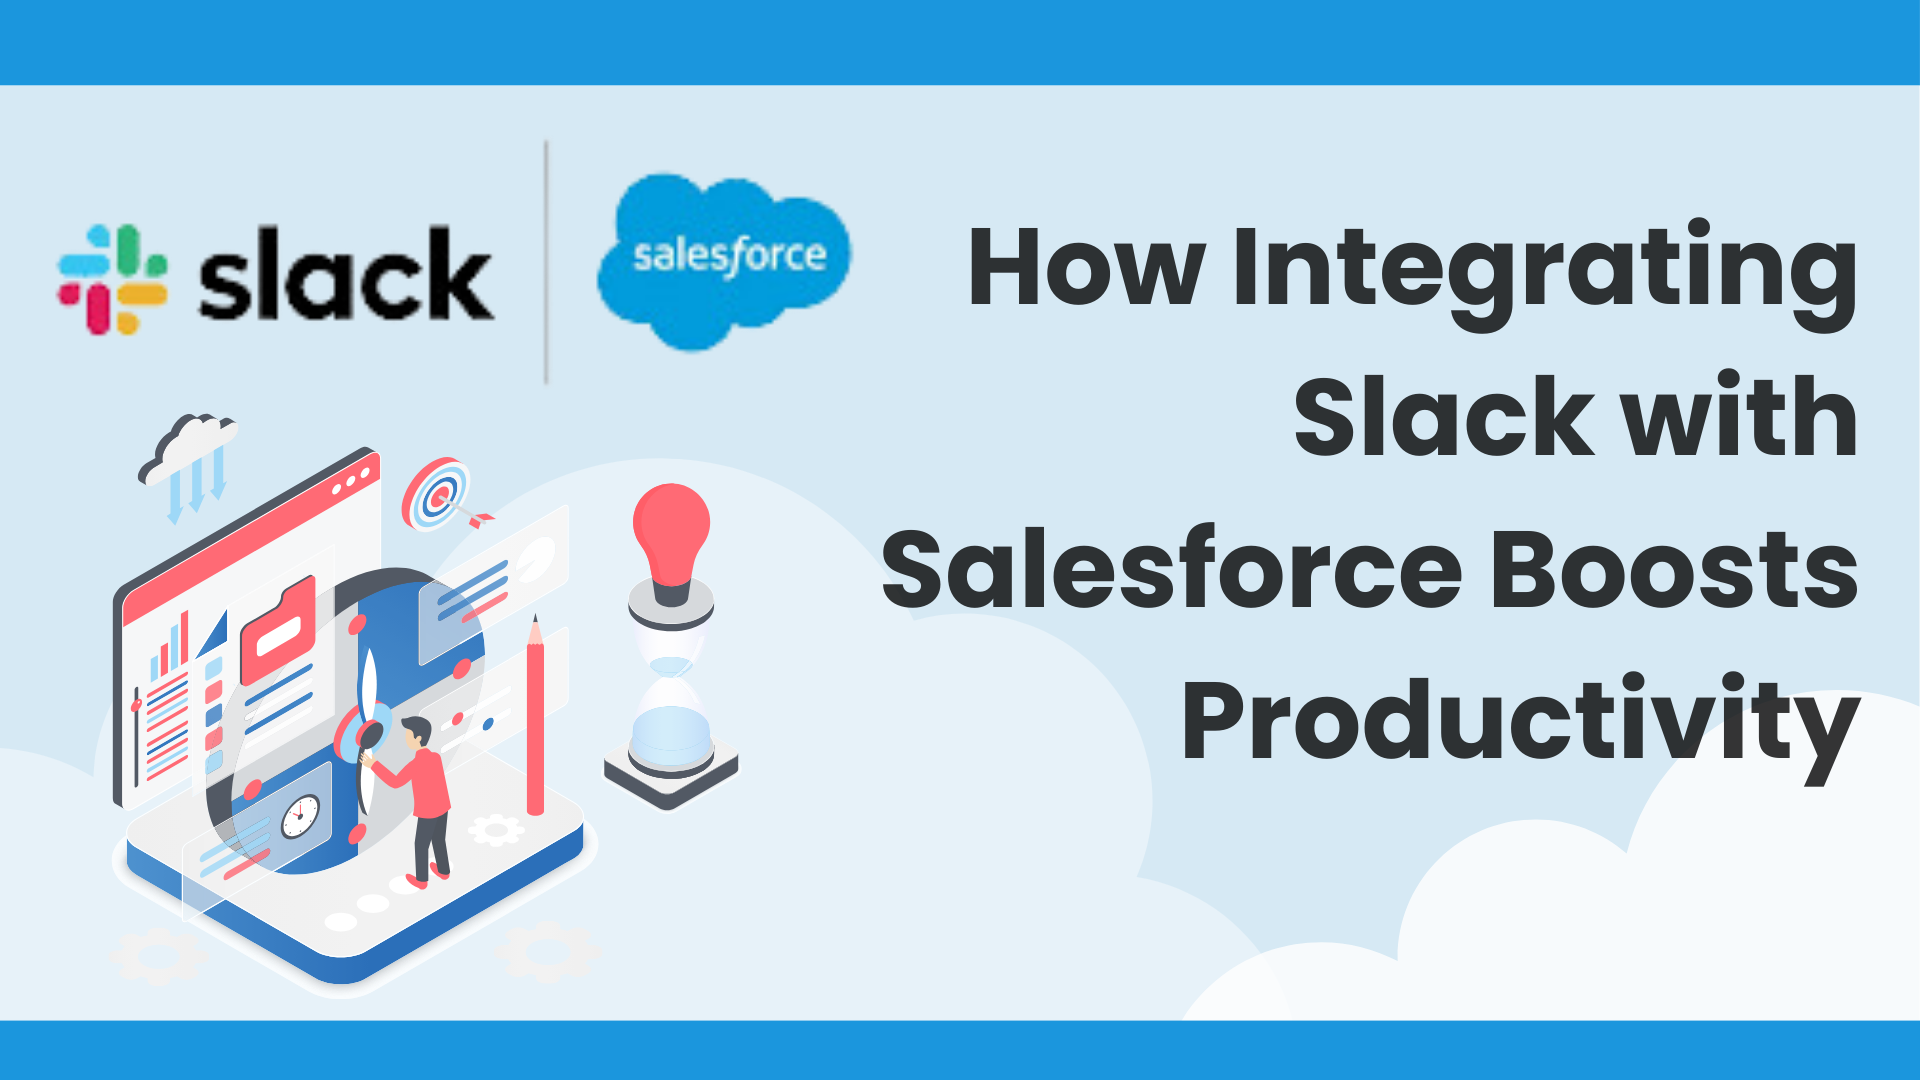 How Integrating Slack with Salesforce Boosts Productivity